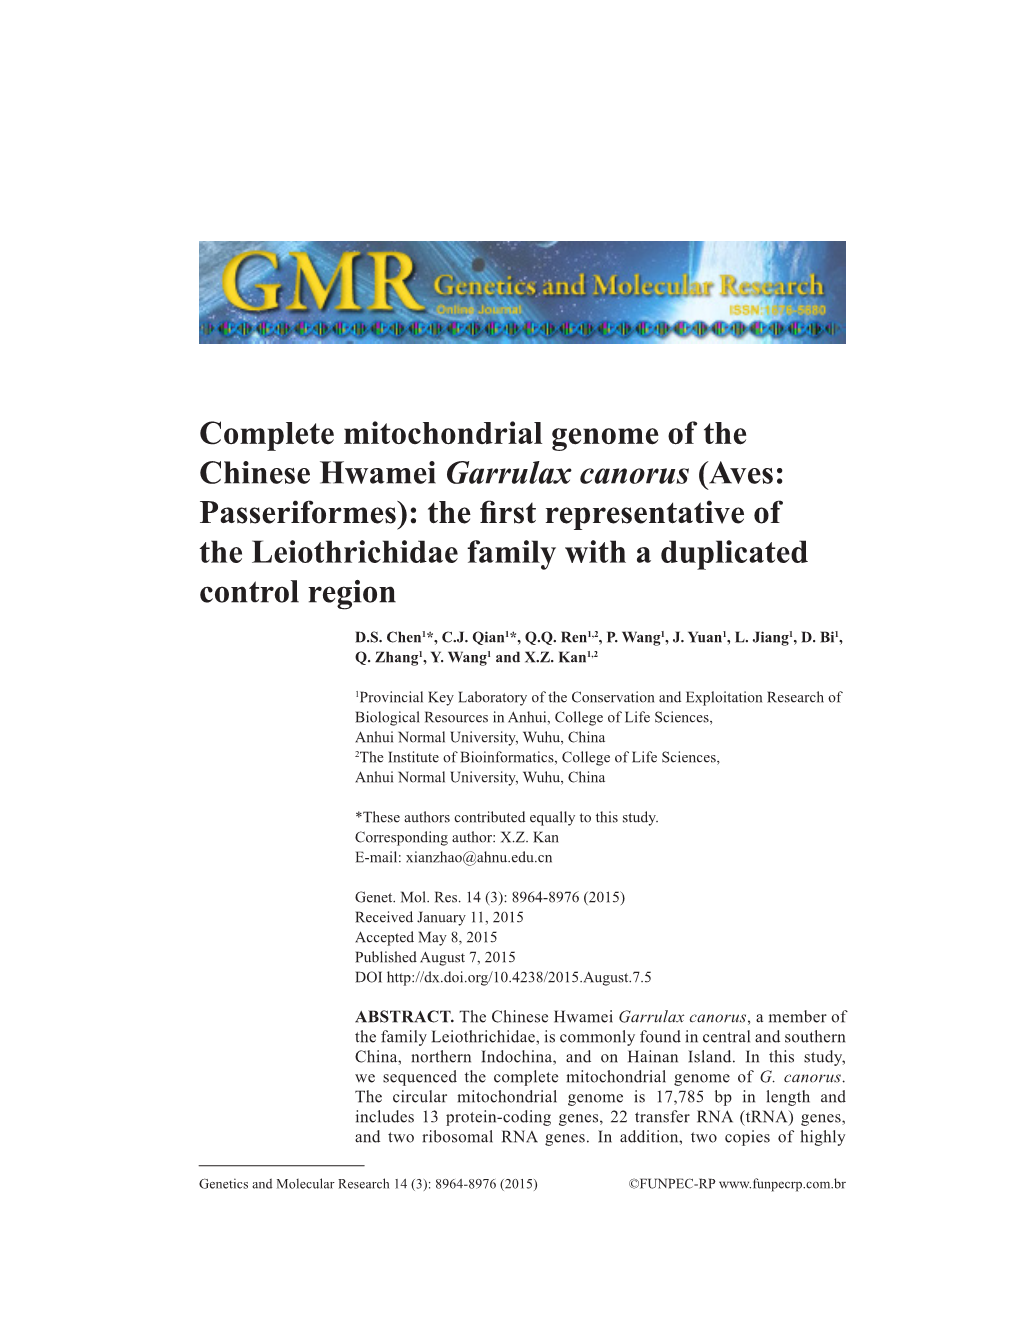 Complete Mitochondrial Genome of the Chinese Hwamei Garrulax Canorus